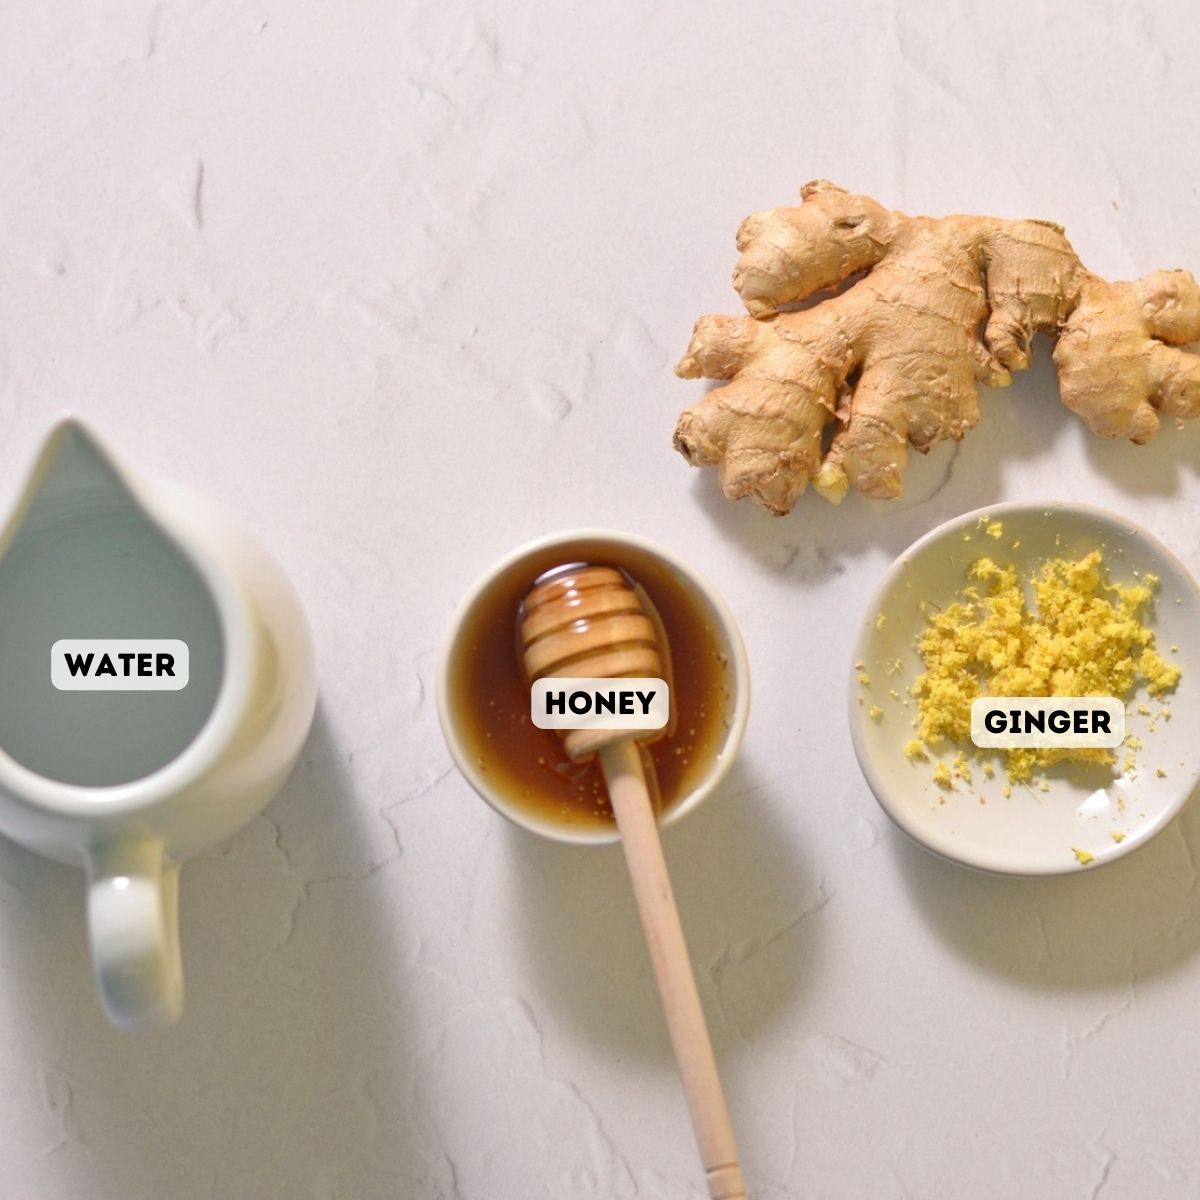 Ingredients including water, honey, and ginger.